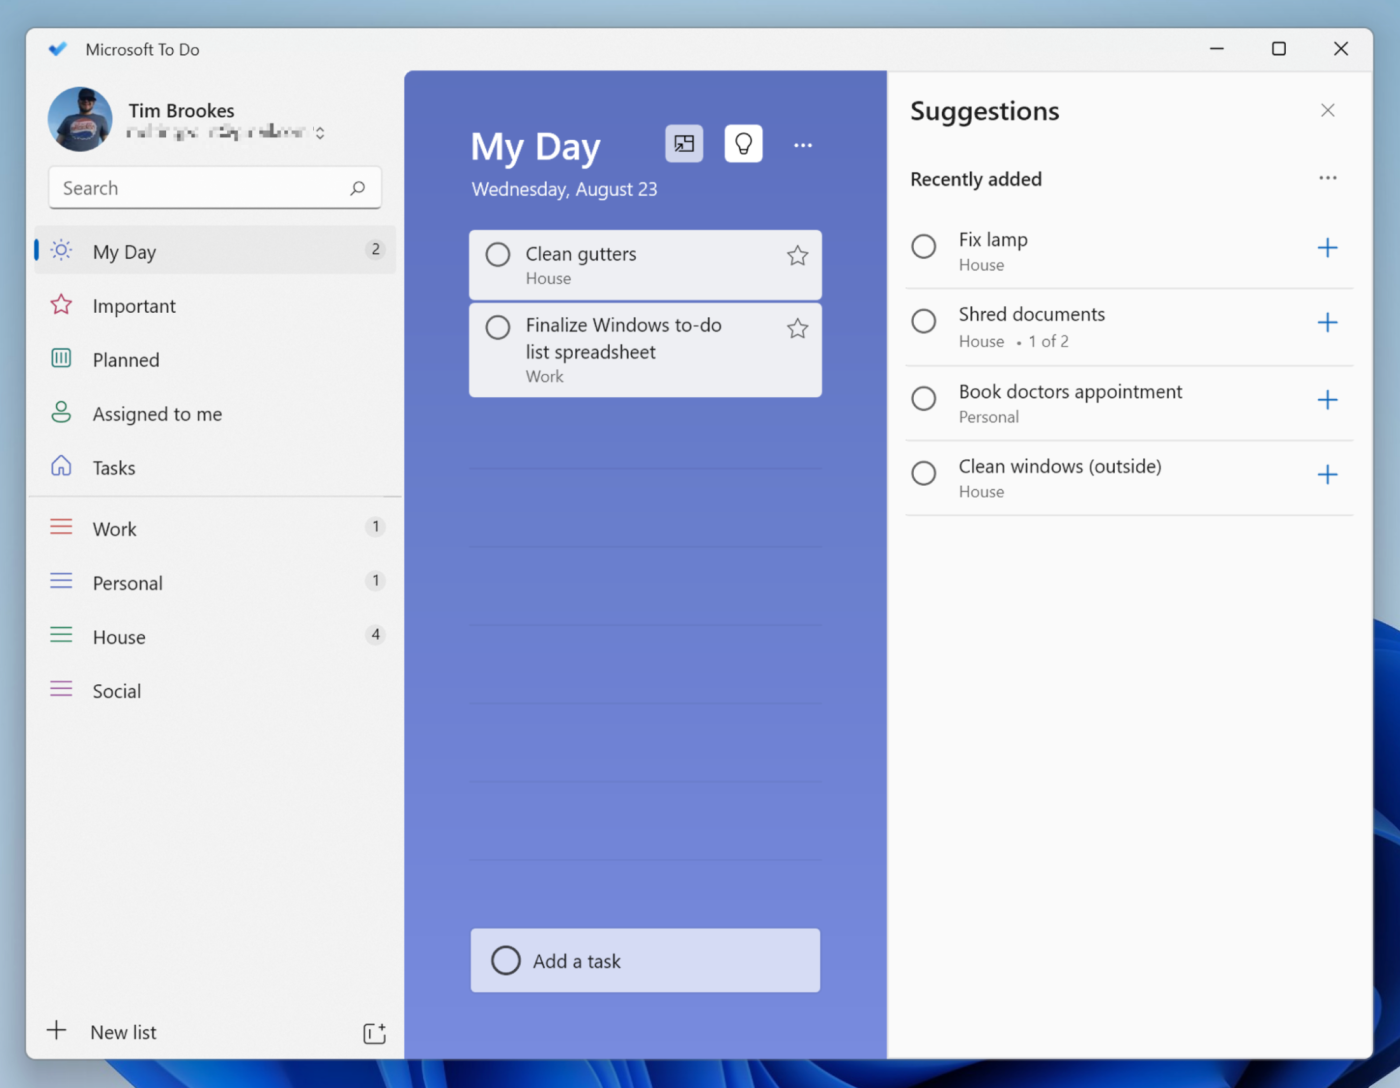 Microsoft To Do, our pick for the best all around Windows to-do list app